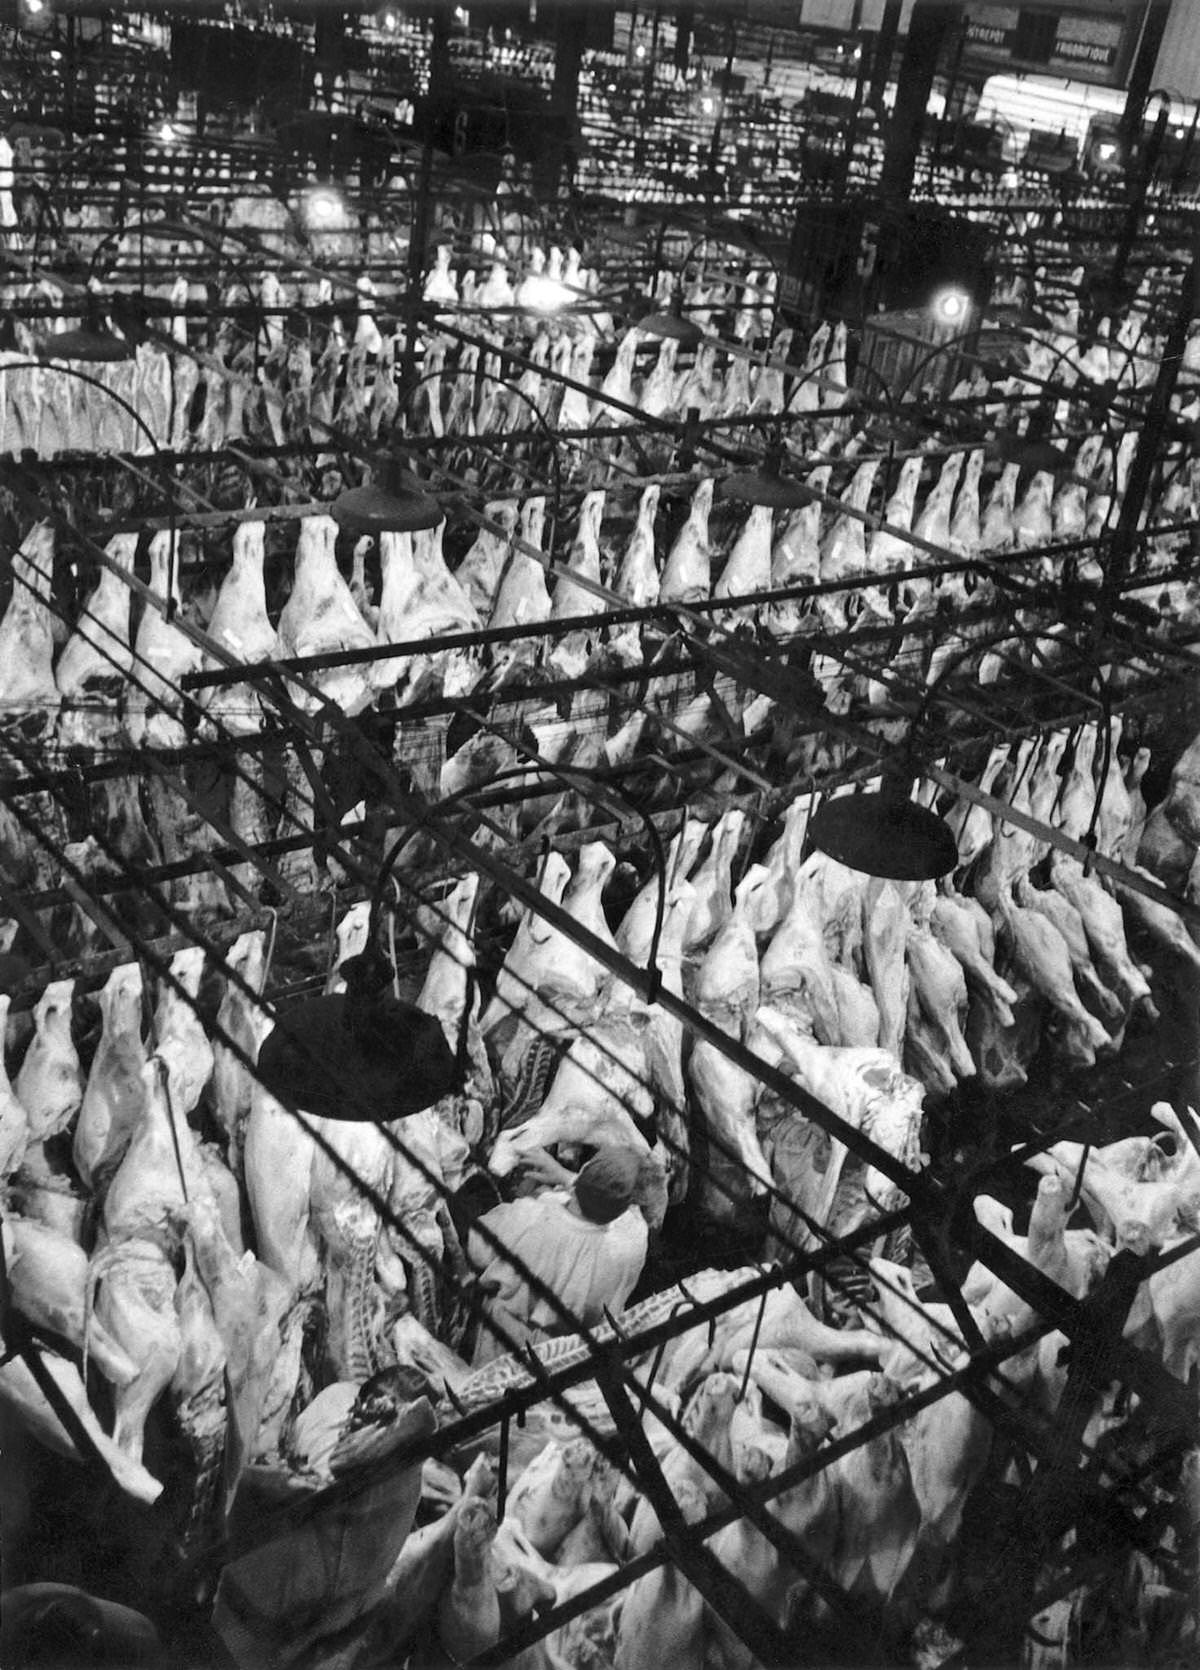 The meat hall in Les Halles, which was historically the traditional central market of Paris, at seven in the morning, on June 3, 1955